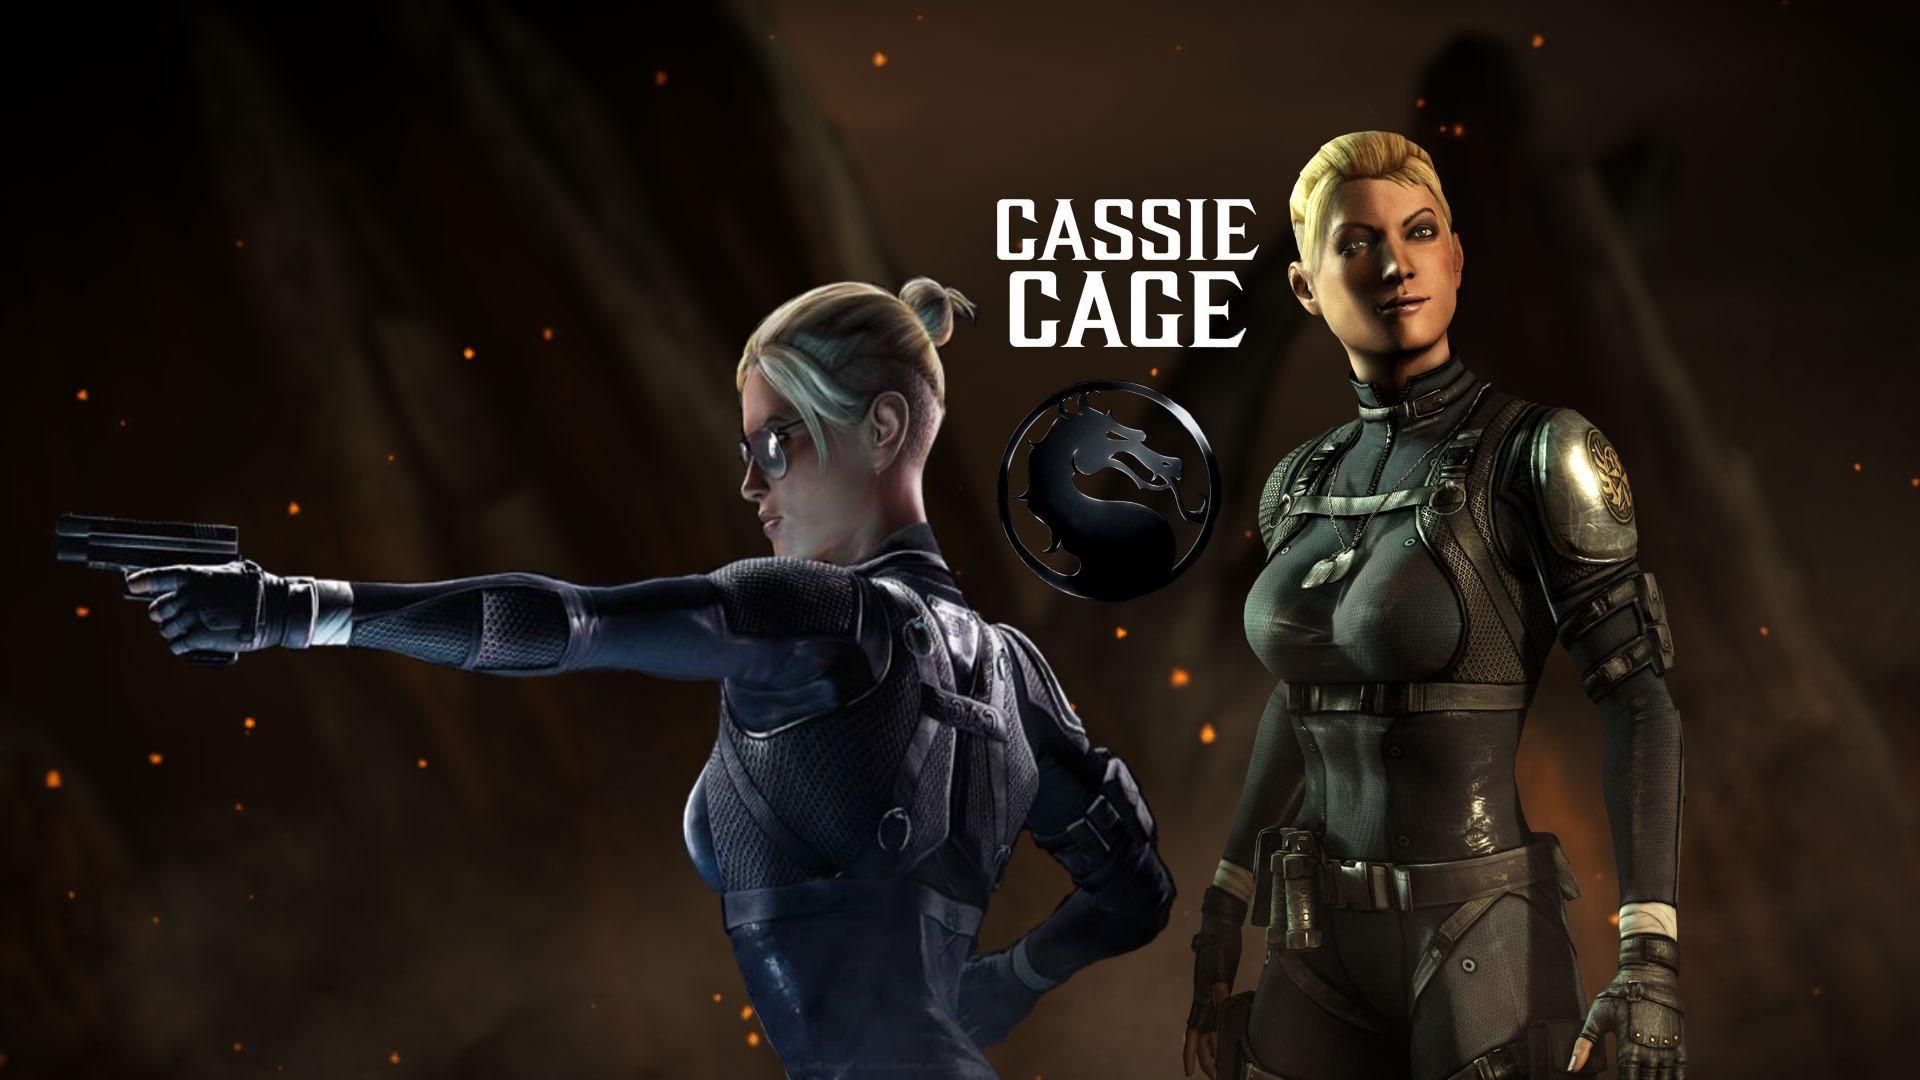 Group of Cassie Cage Wallpaper